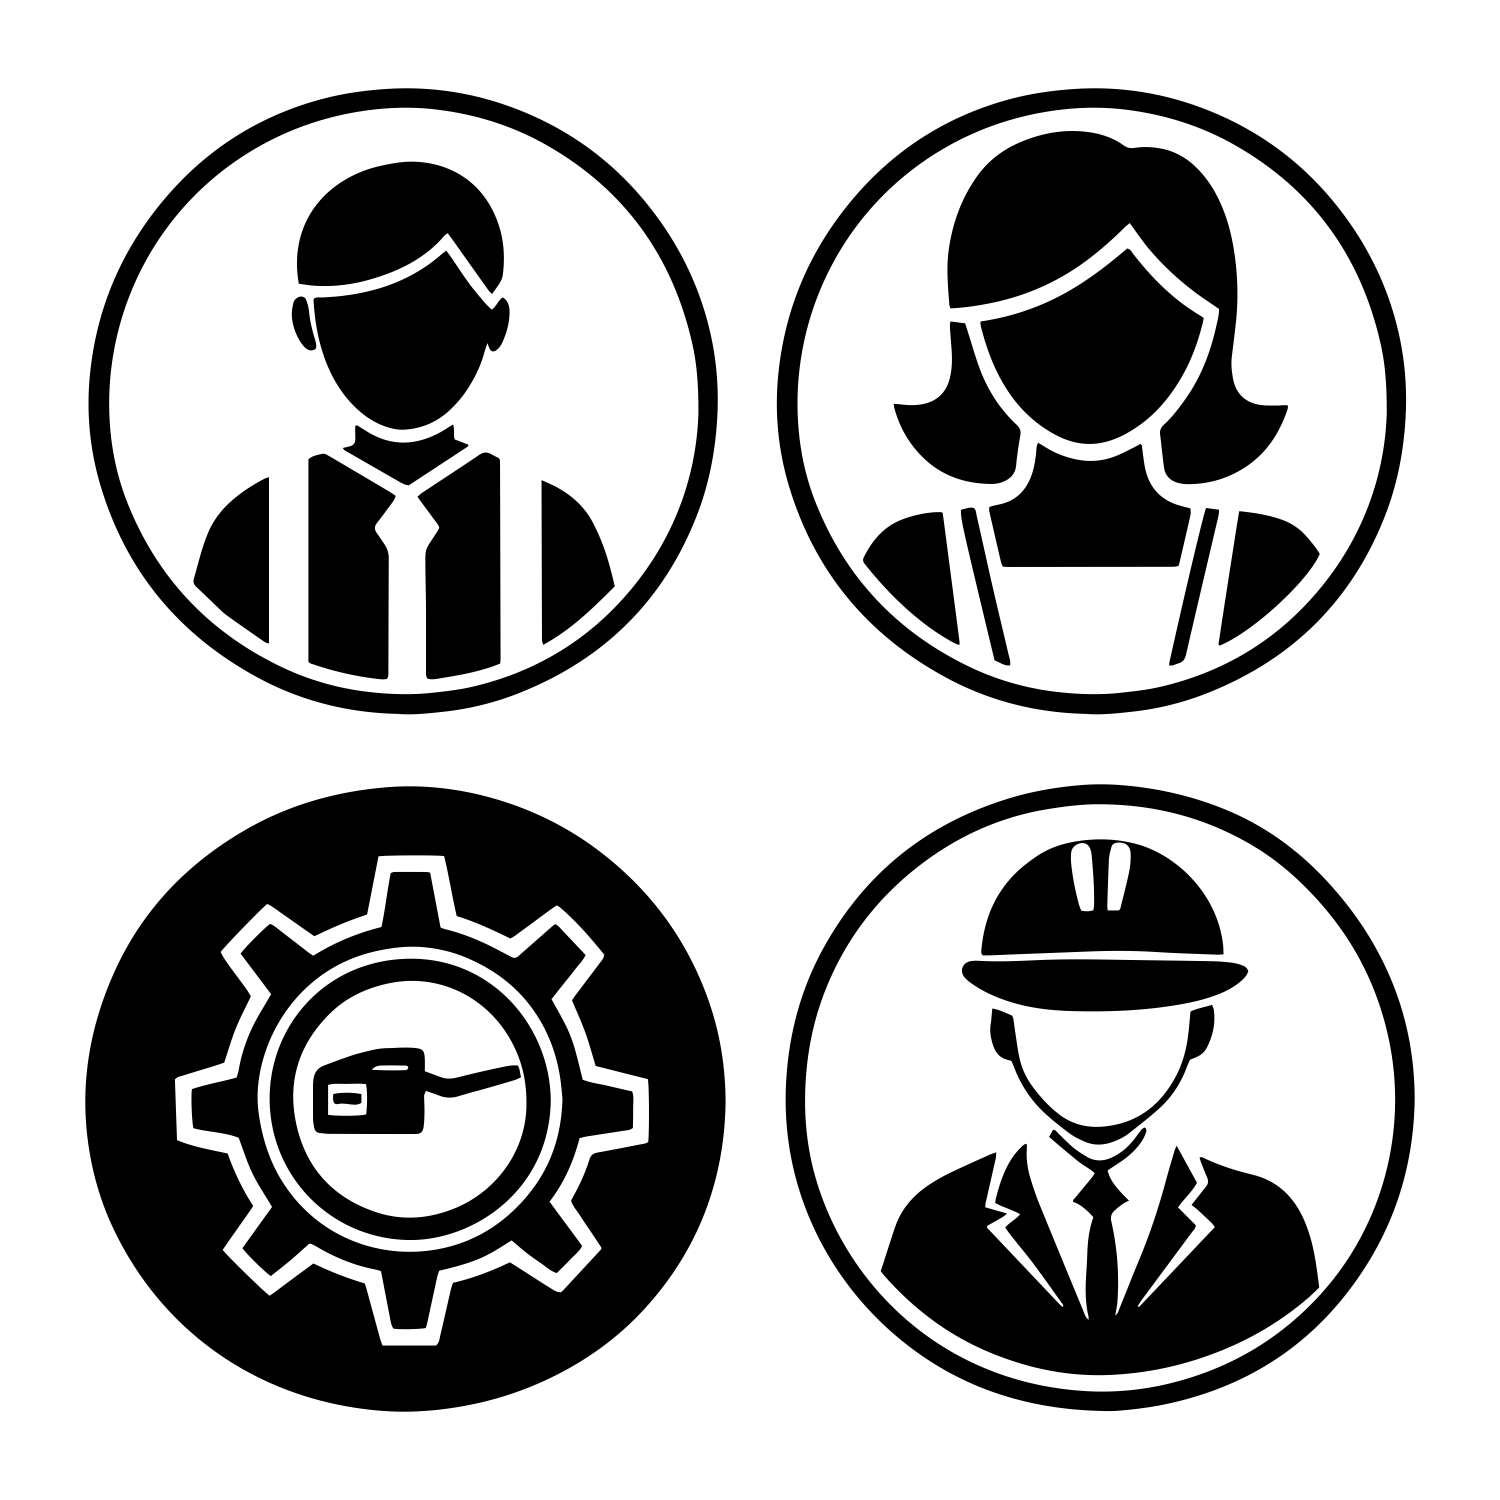 Free vector set of worker icon illustration isolated in white background CDR file download for free